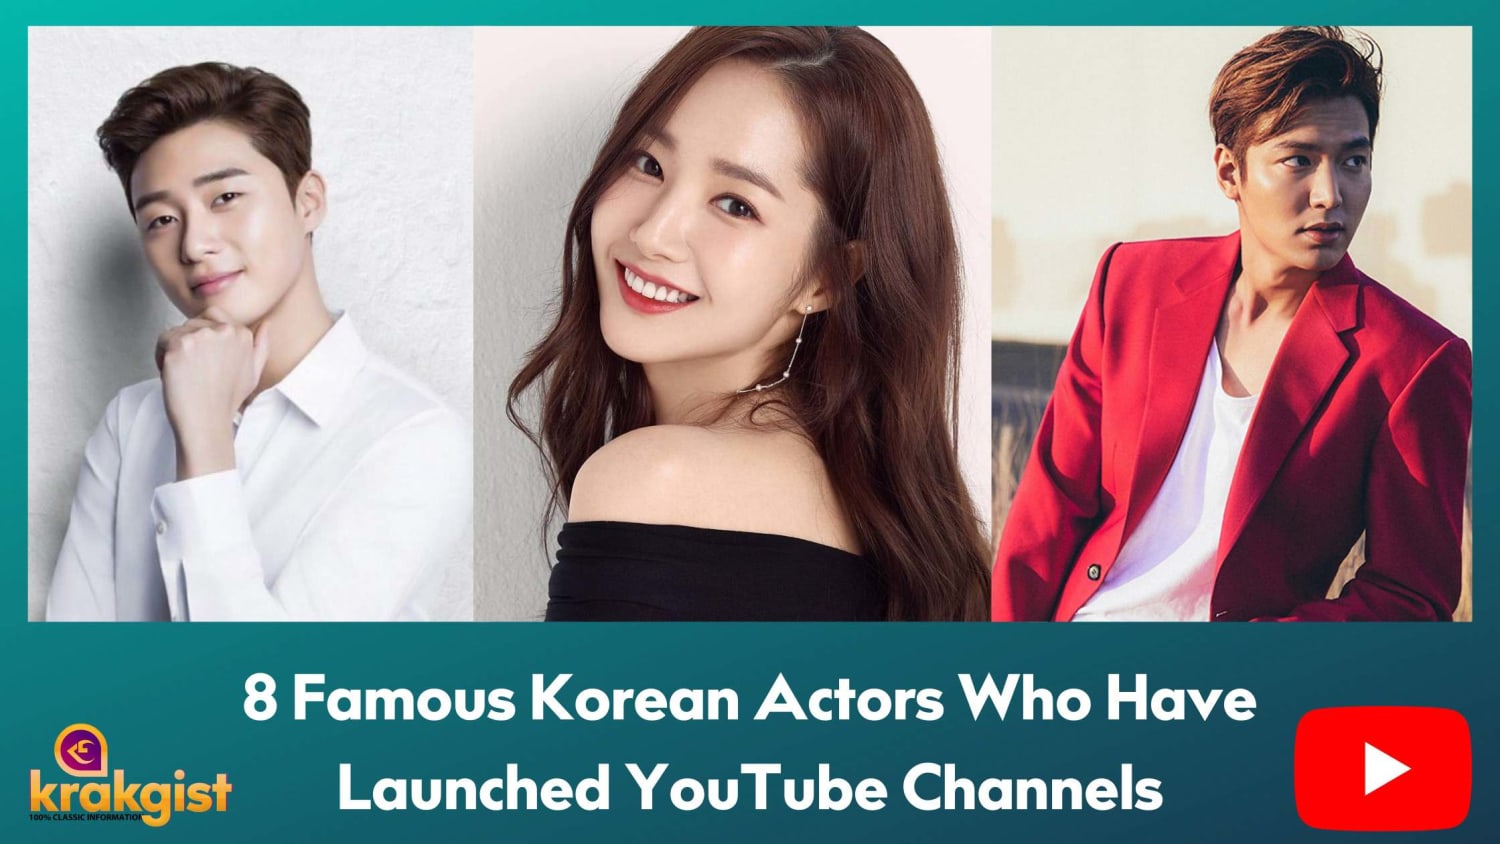 8 Famous Korean Actors Who Have Launched YouTube Channels